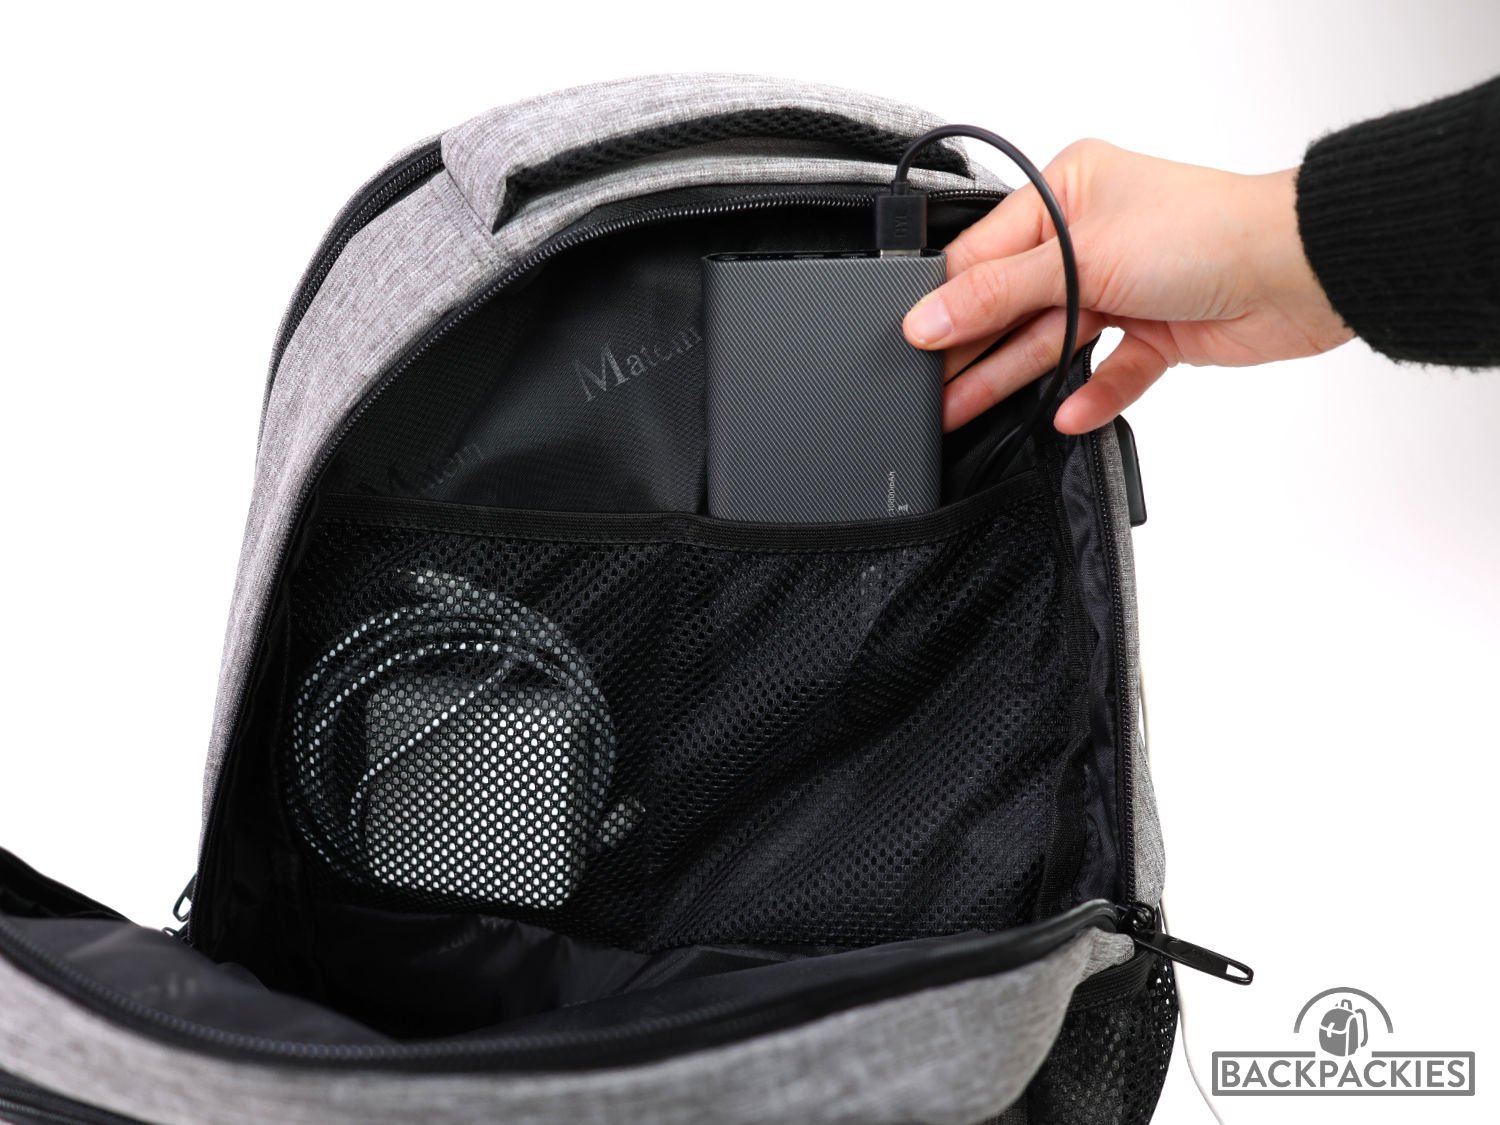 Matein Travel Laptop USB Backpack review